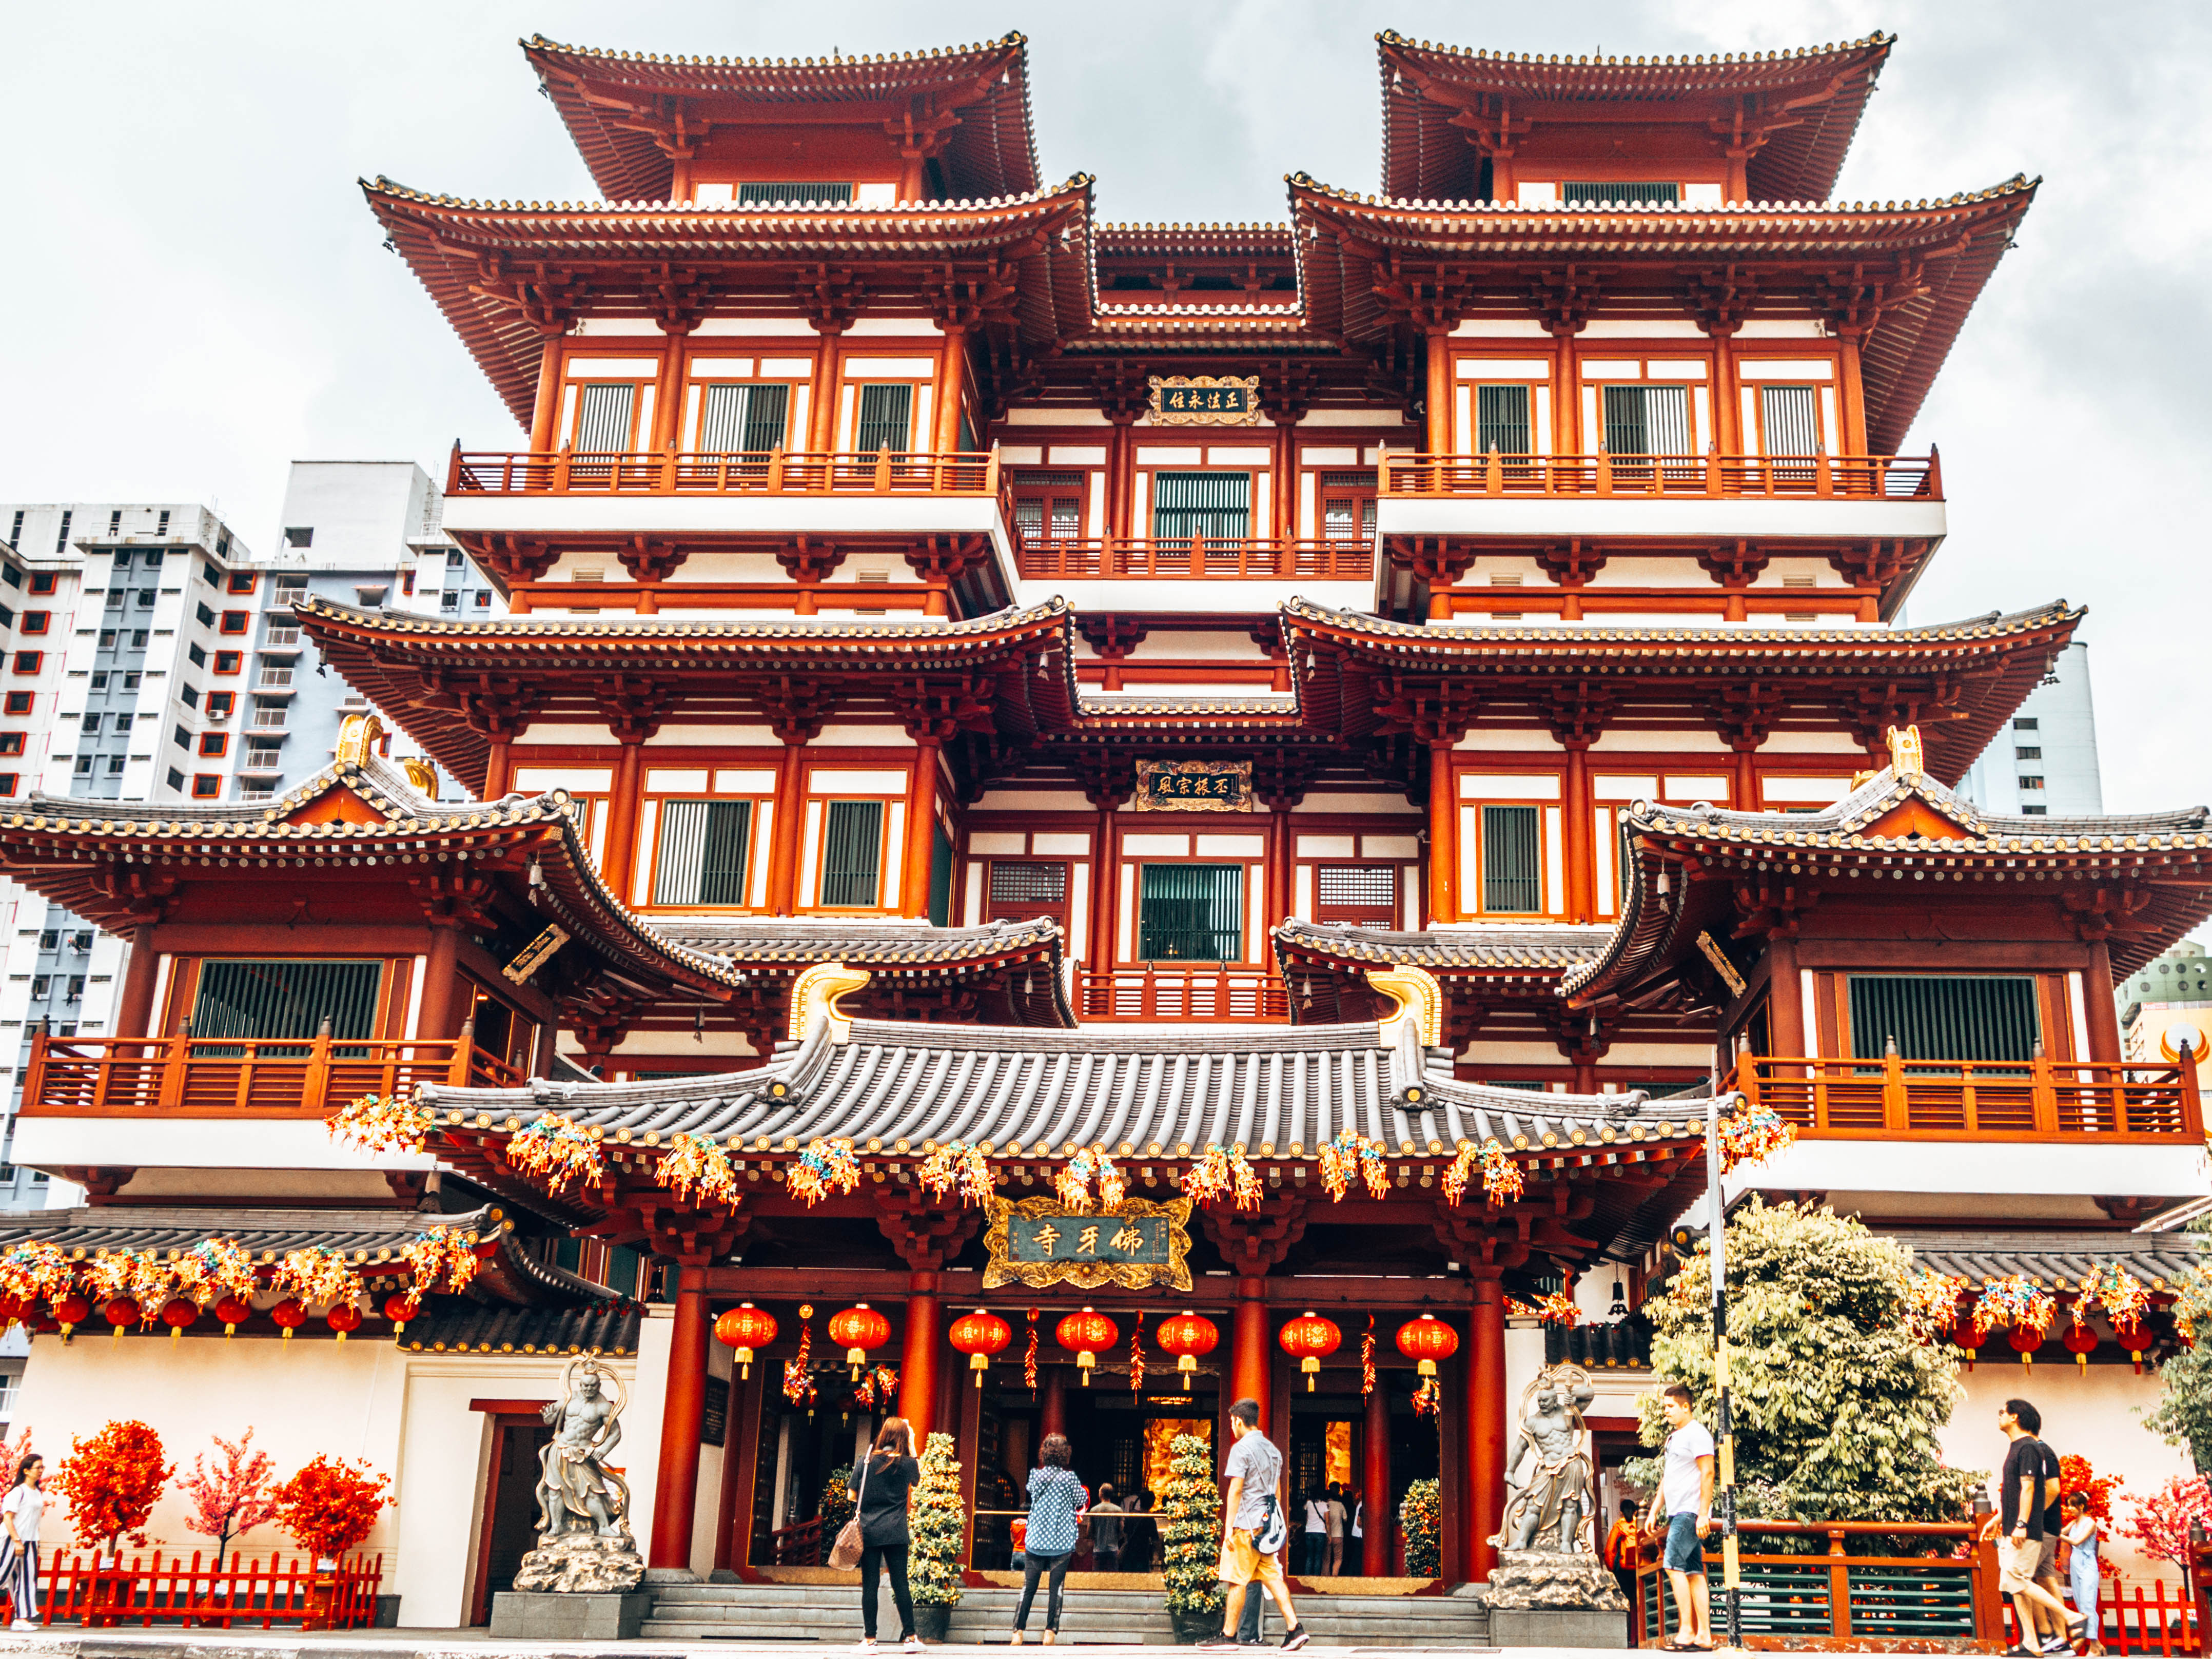 Tooth Relic Temple, Chinatown - 3-day Singapore itinerary for budget travelers 